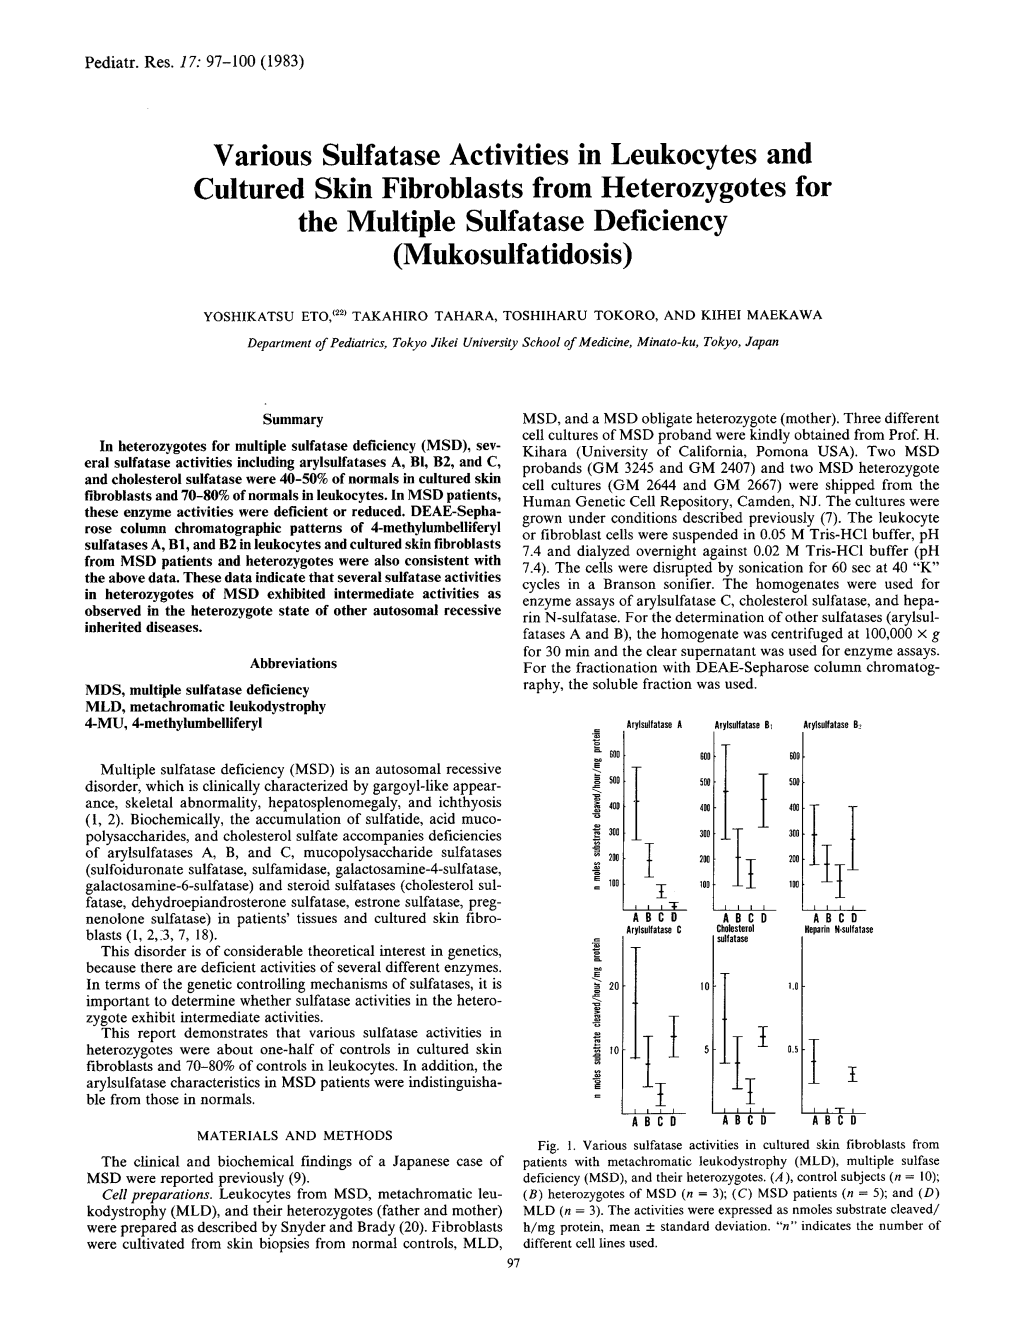 Various Sulfatase Activities in Leukocytes and Cultured Skin Fibroblasts from Heterozygotes for the Multiple Sulfatase Deficiency (Mukosulfatidosis)